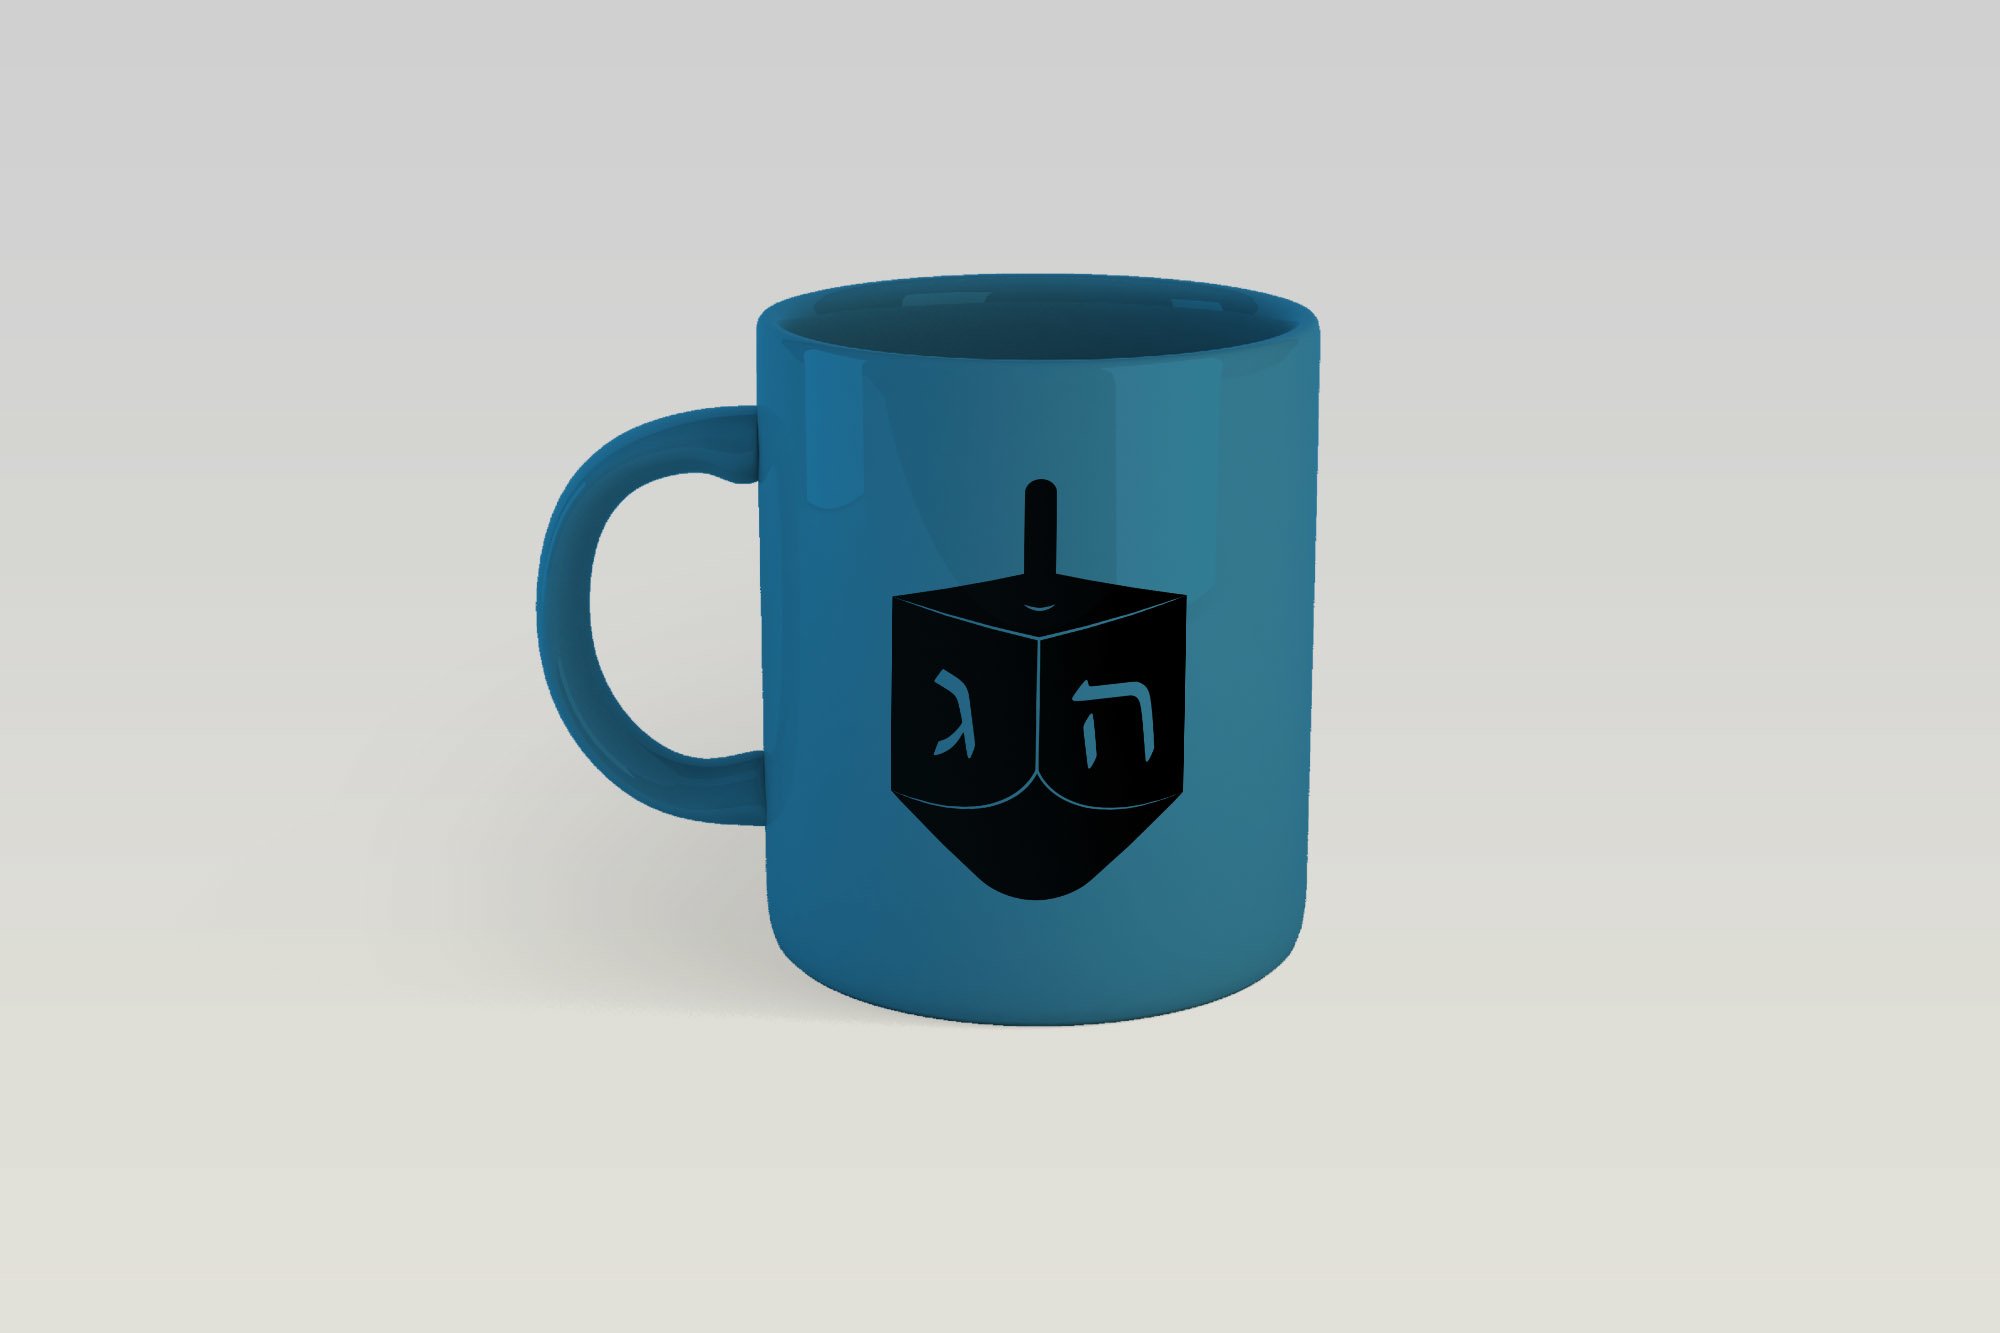 Blue cup with black print.